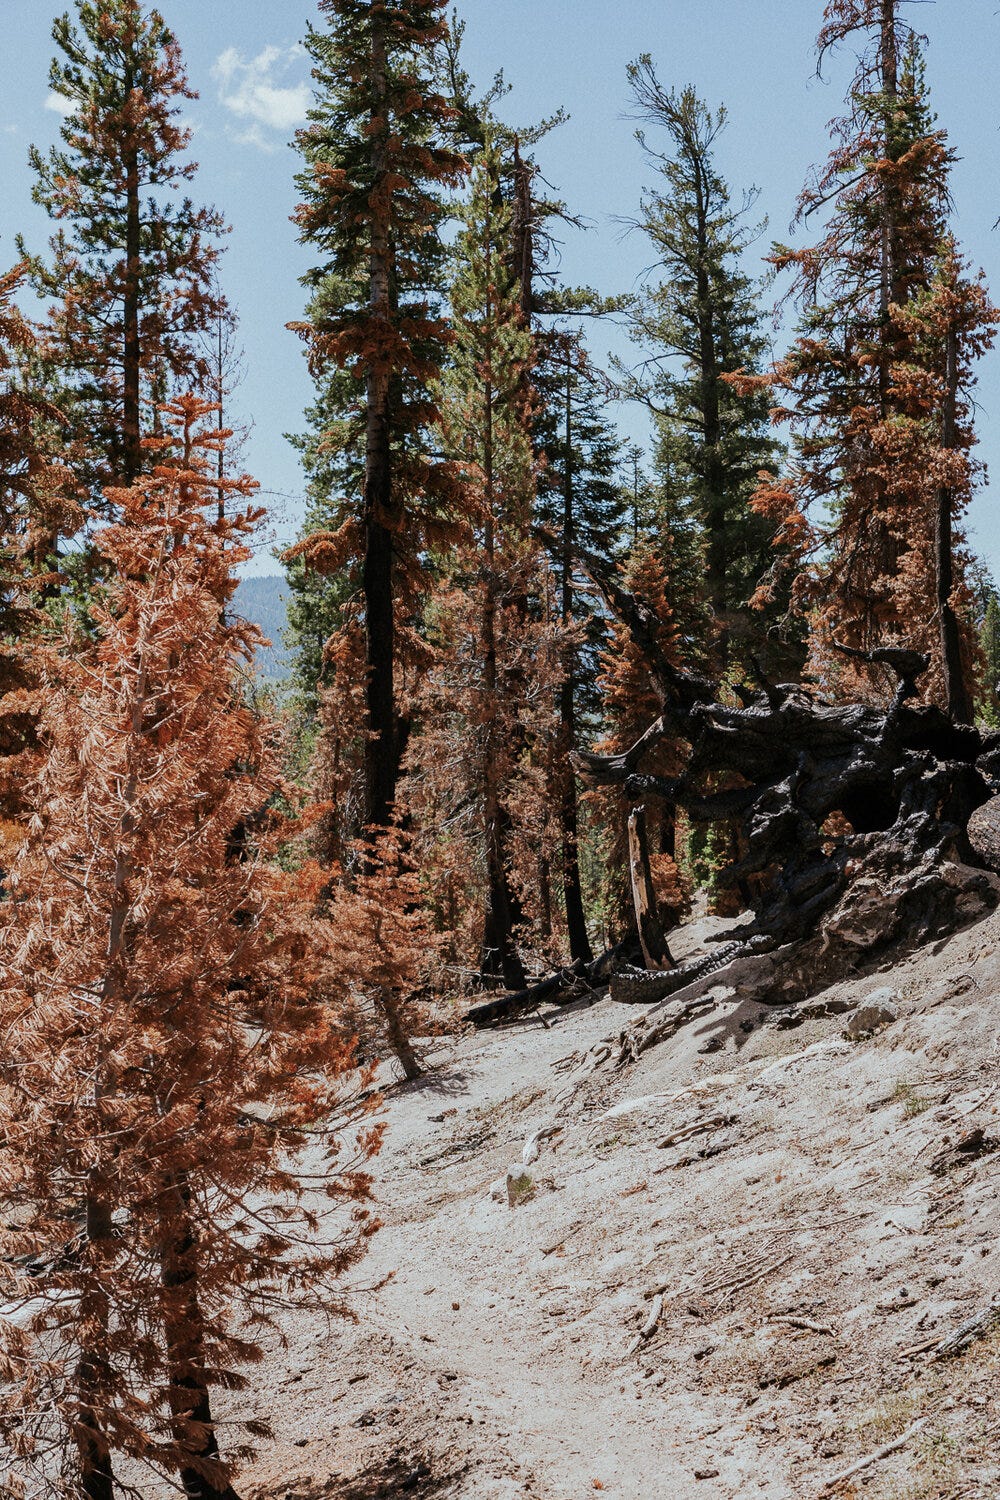 Burned trees from a fire that decimated the Devils Postpile area in 1993.